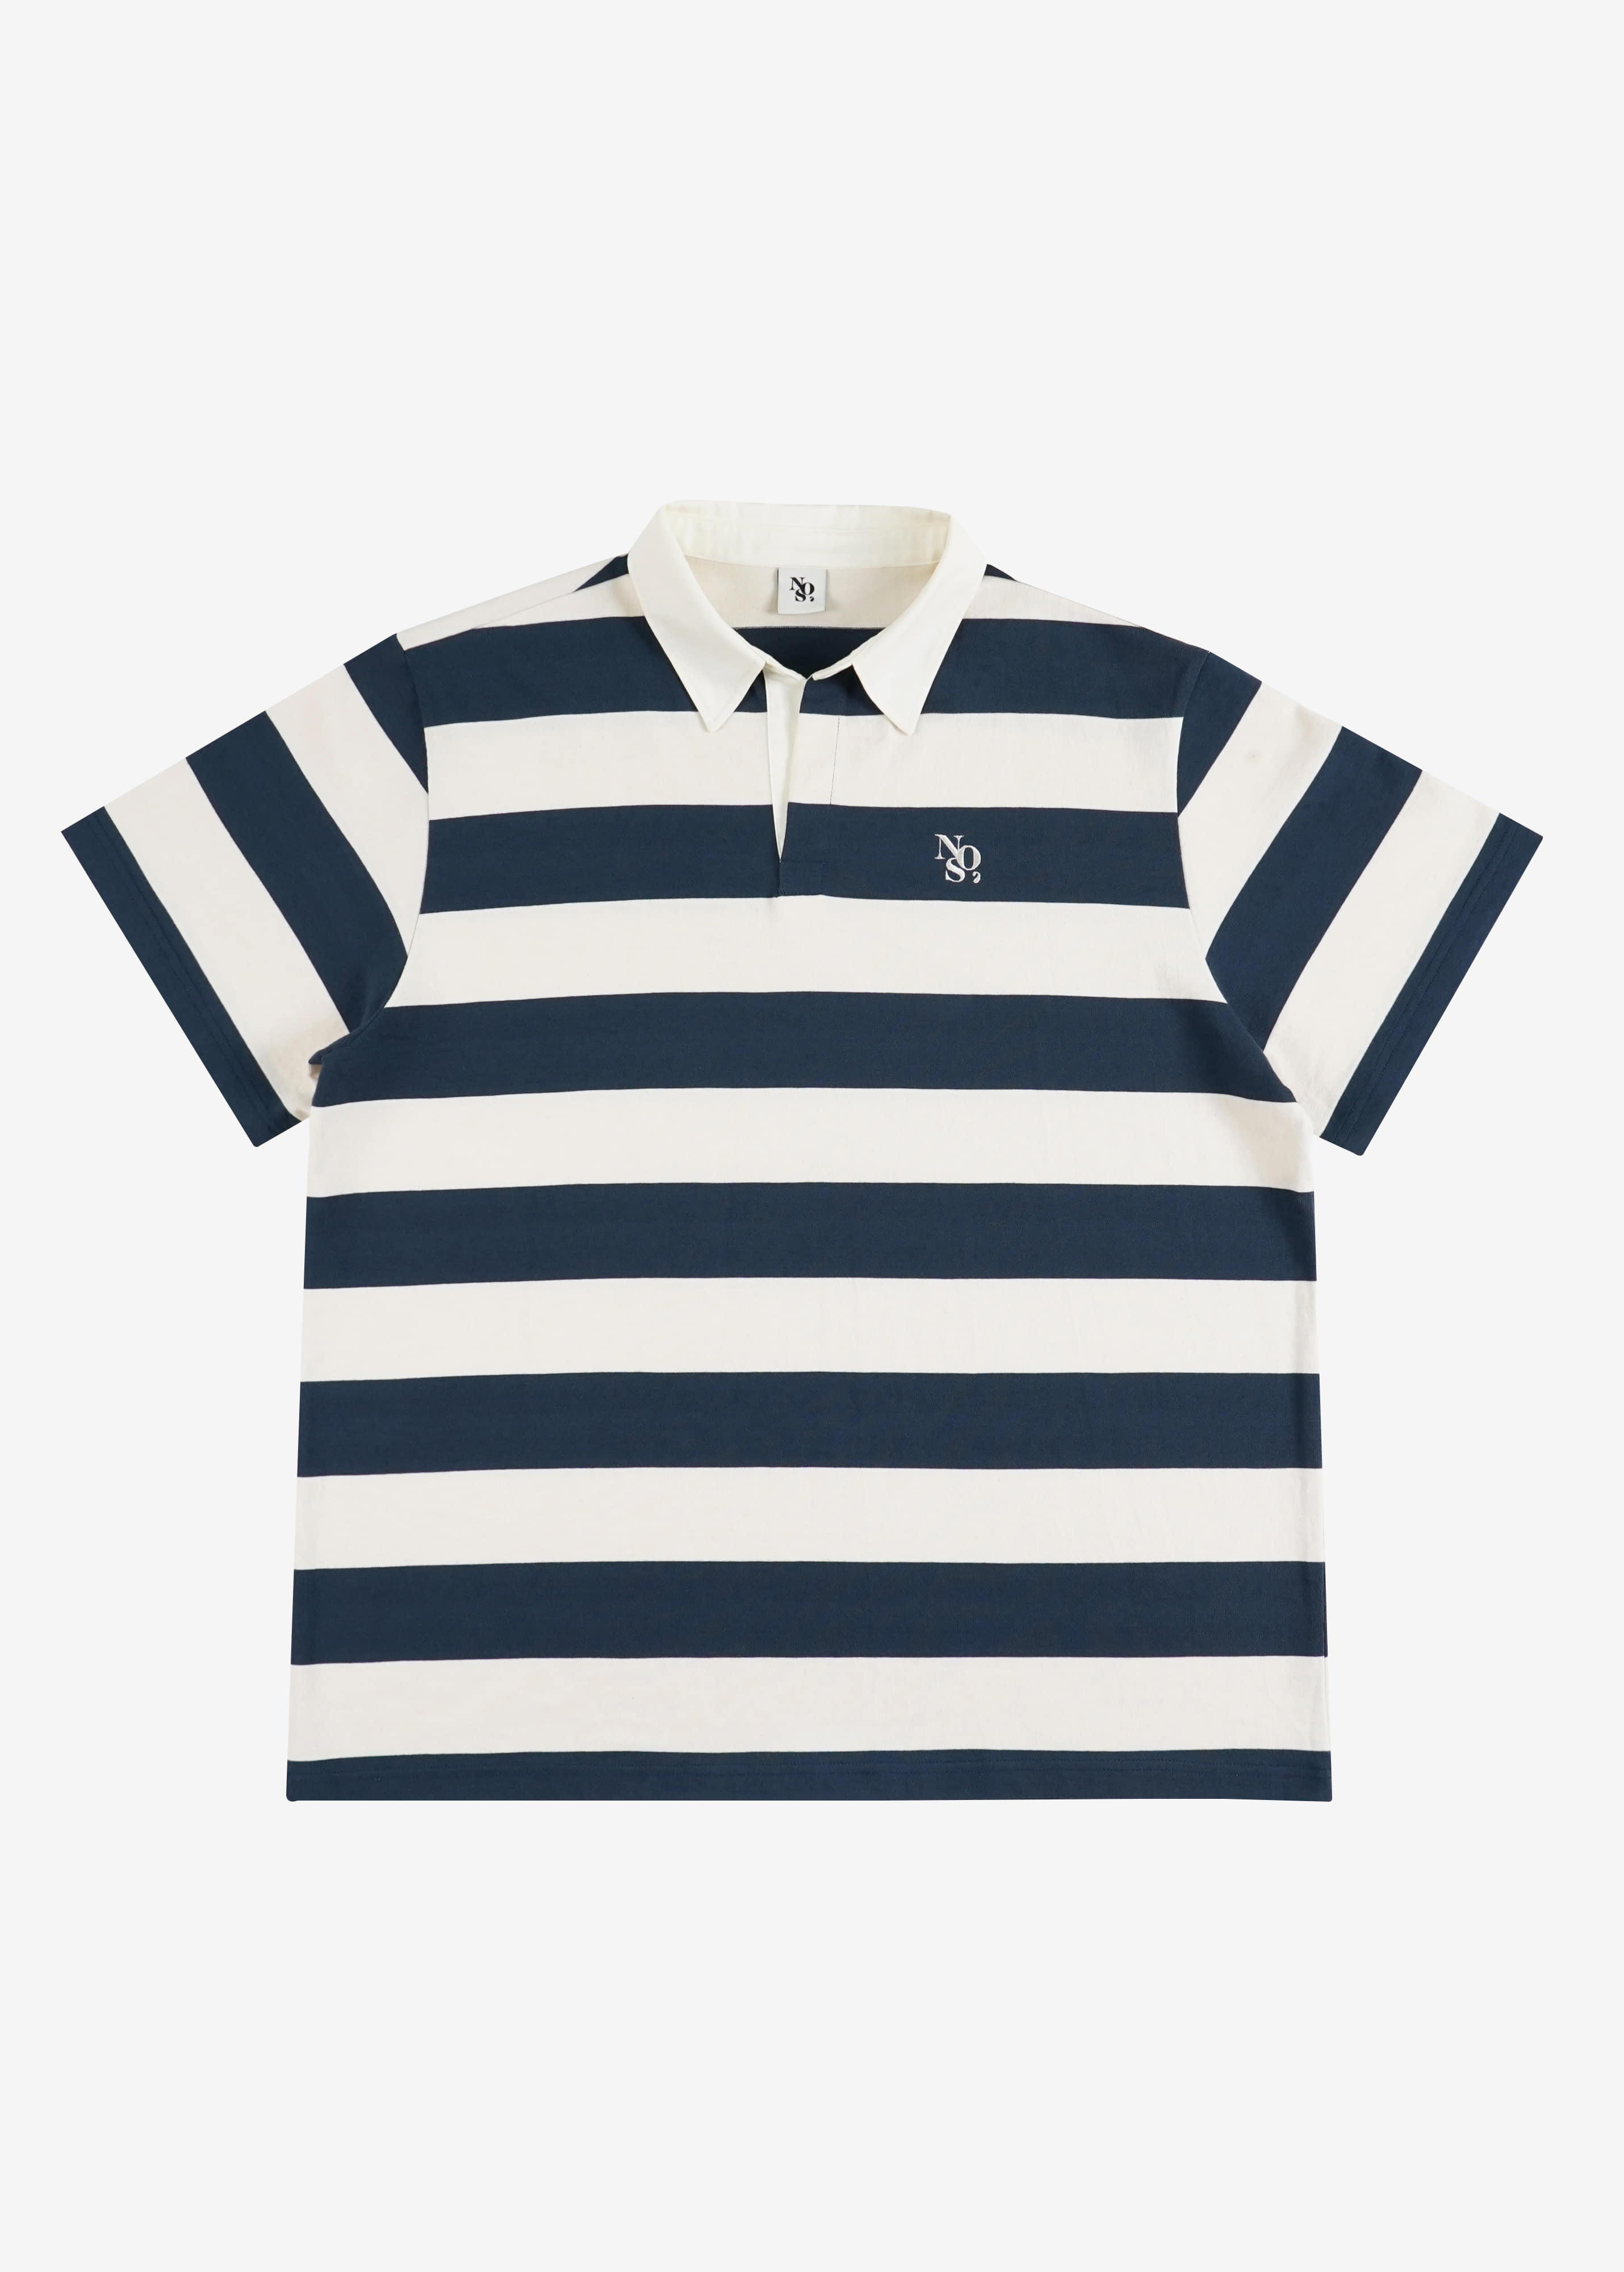 Rugby T-shirt - Navy